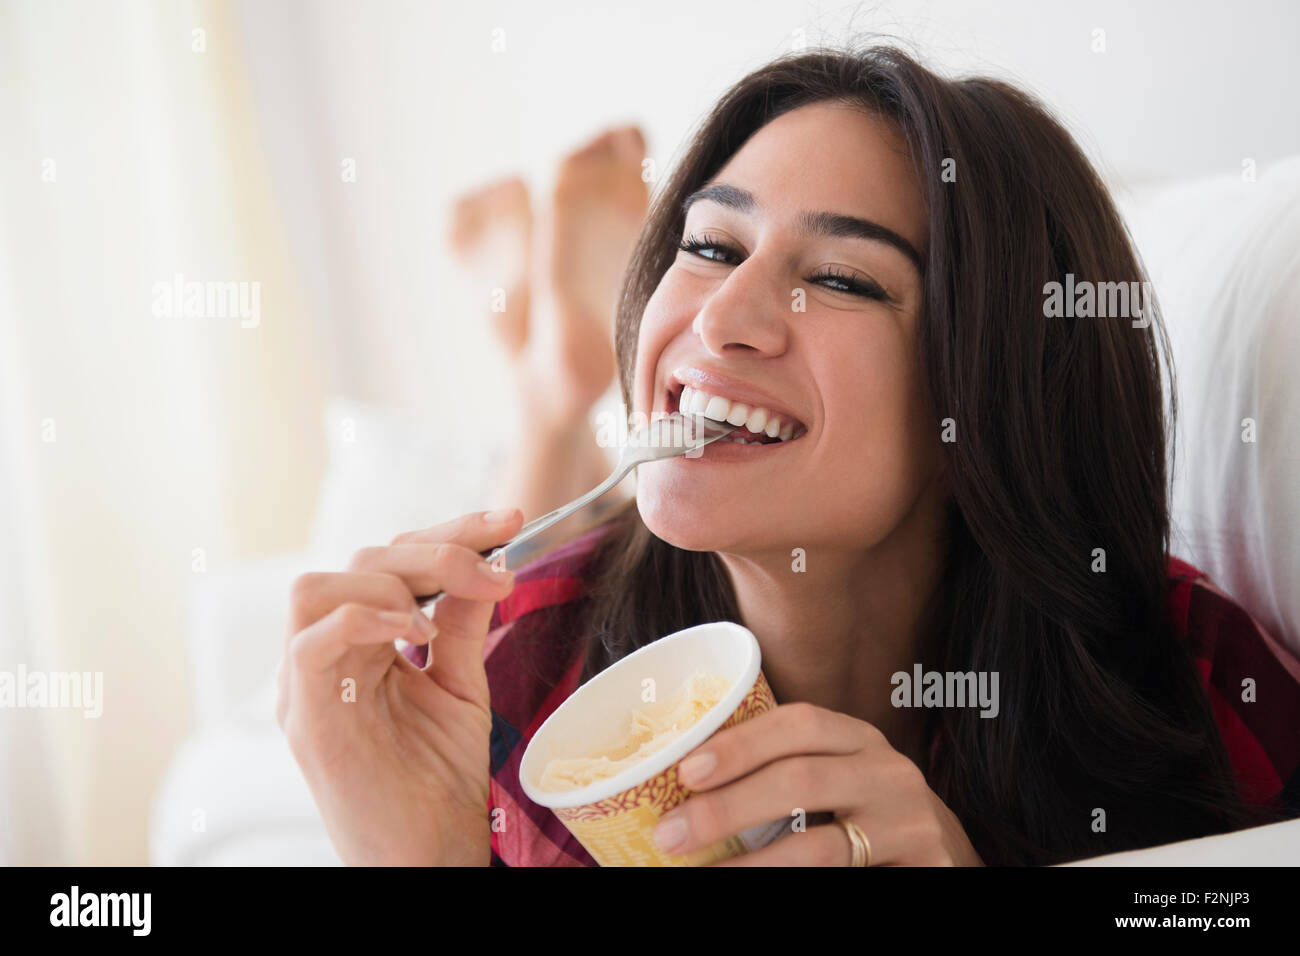 Close up of woman eating ice cream sur canapé Banque D'Images